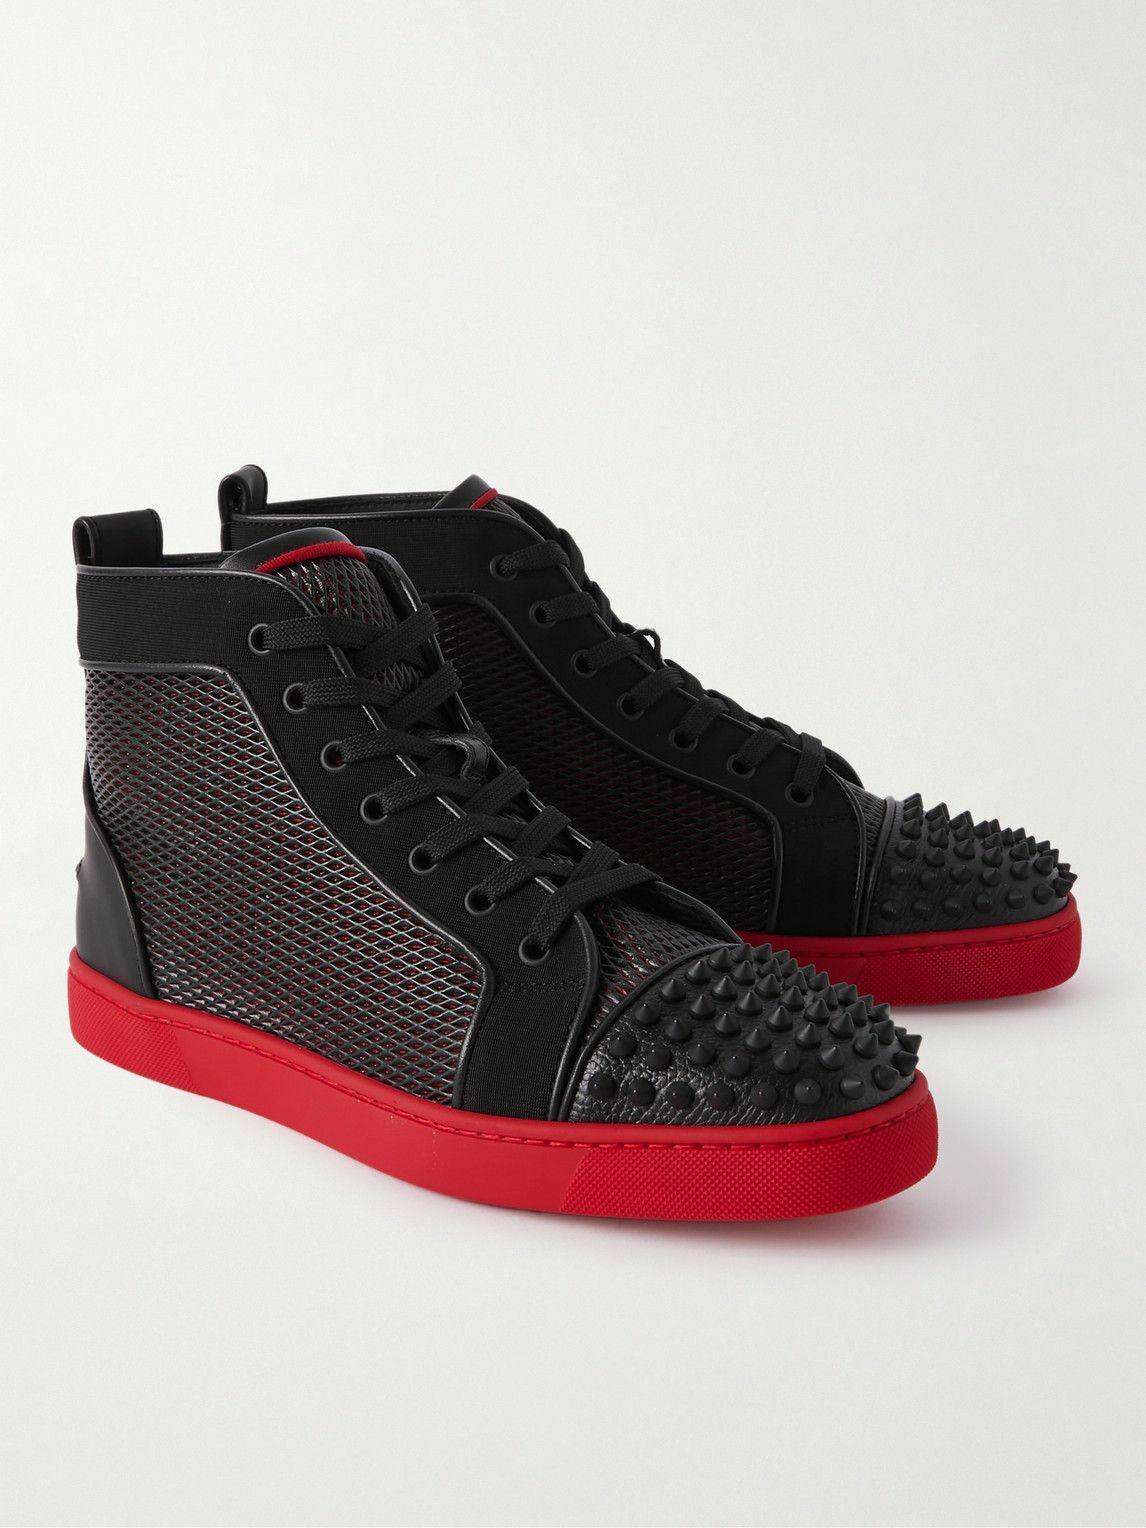 Christian Louboutin Blue/White Leather and Canvas Louis Spikes